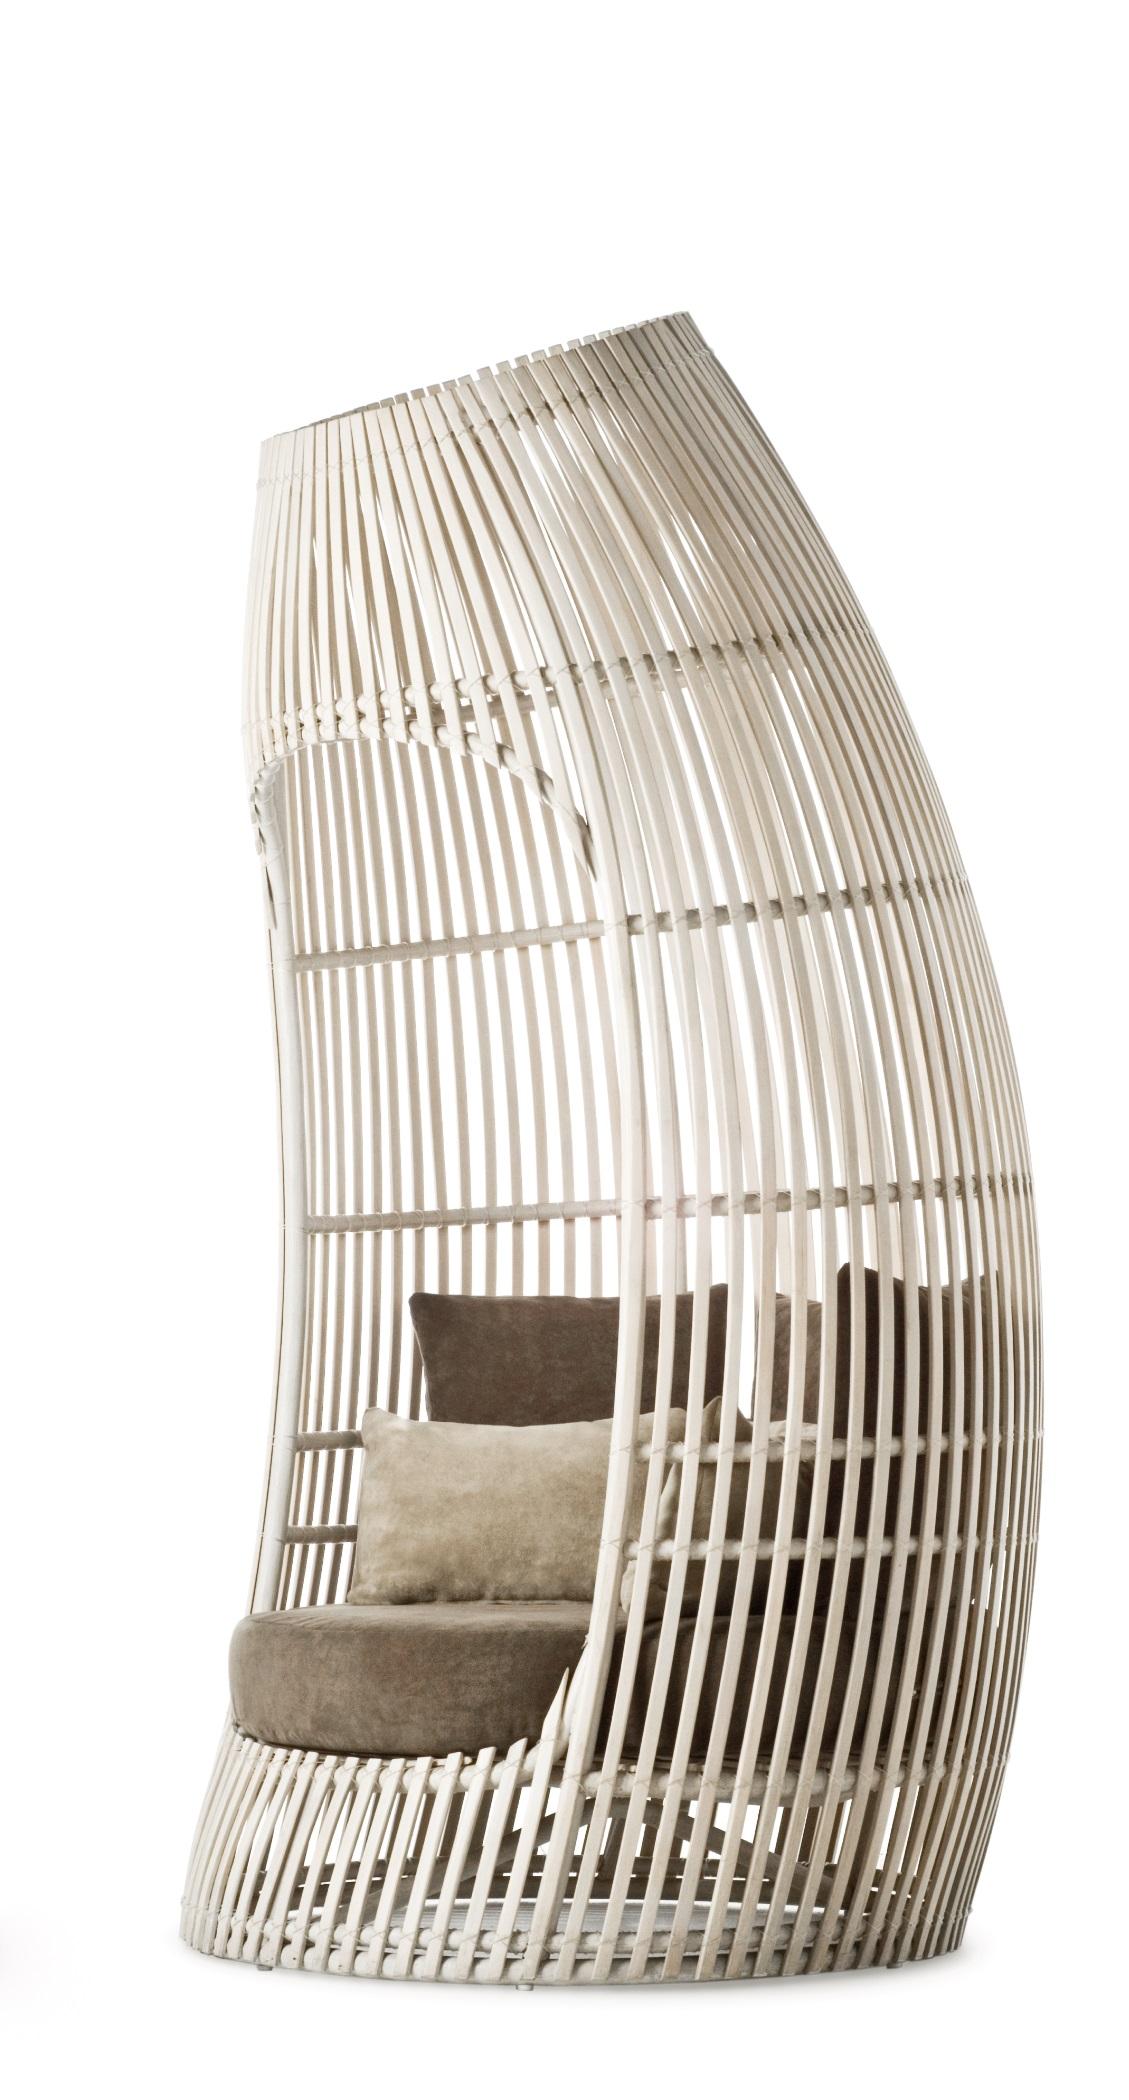 Indoor Lolah capsule 1 by Kenneth Cobonpue
Materials: Rattan, Nylon.
Also available in other colors and for outdoors.
Dimensions: 113.5 cm x 103 cm x H 220cm

Created using construction techniques similar to boat-building, Lolah entices the